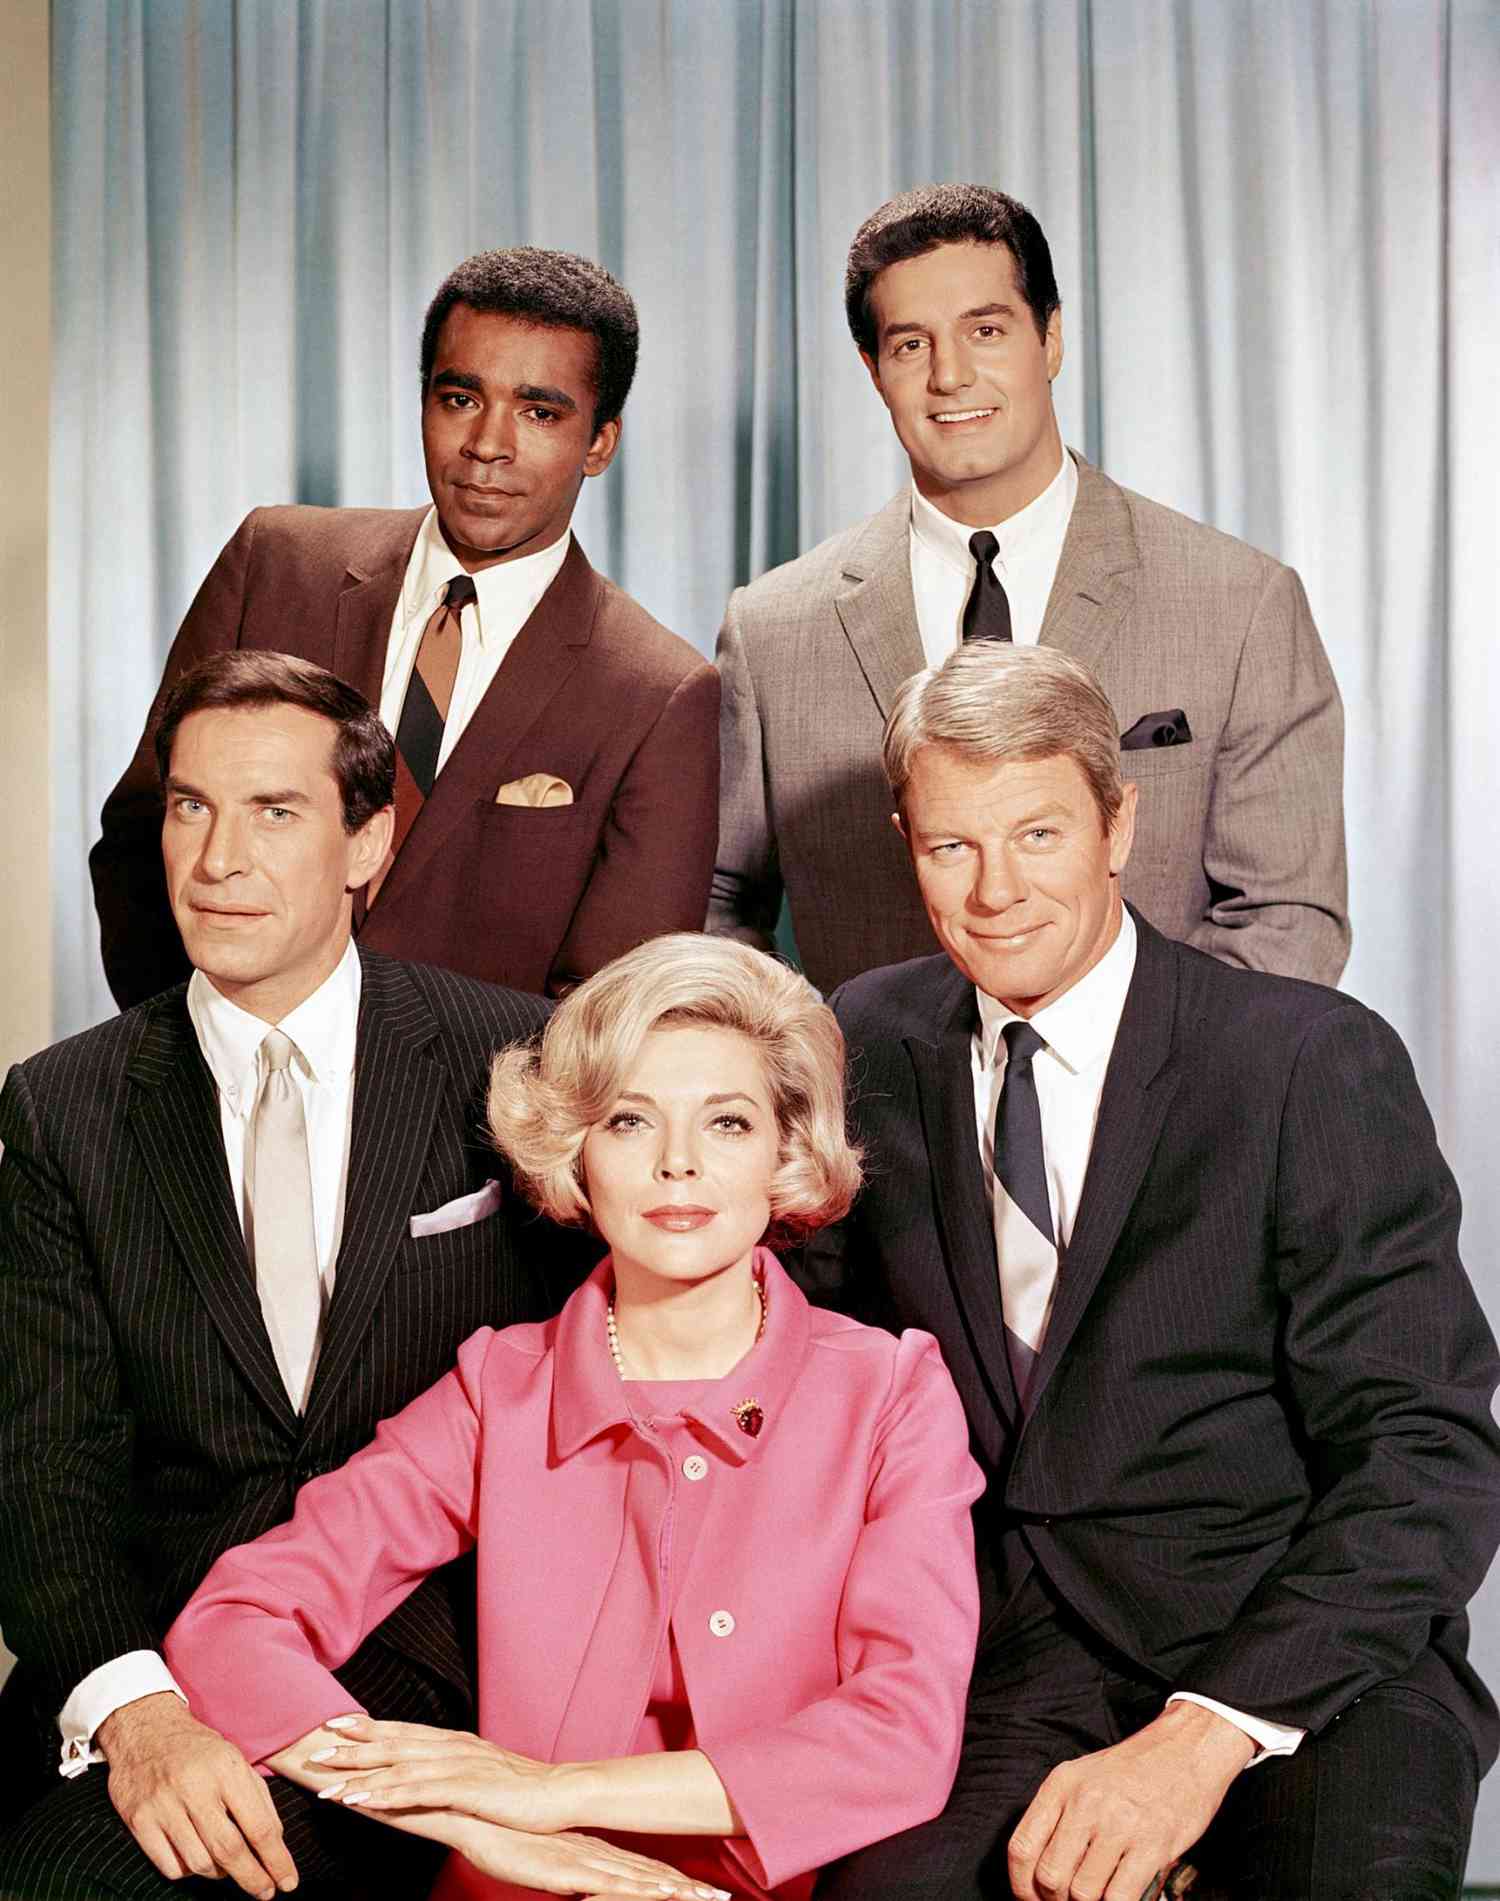 (Clockwise from top left) Greg Morris as Barney Collier, Peter Lupus as Willy Armitage, Peter Graves as James Phelps, Barbara Bain as Cinnamon Carter, and Landau as Rollin Hand in&nbsp;Mission: Impossible, 1967